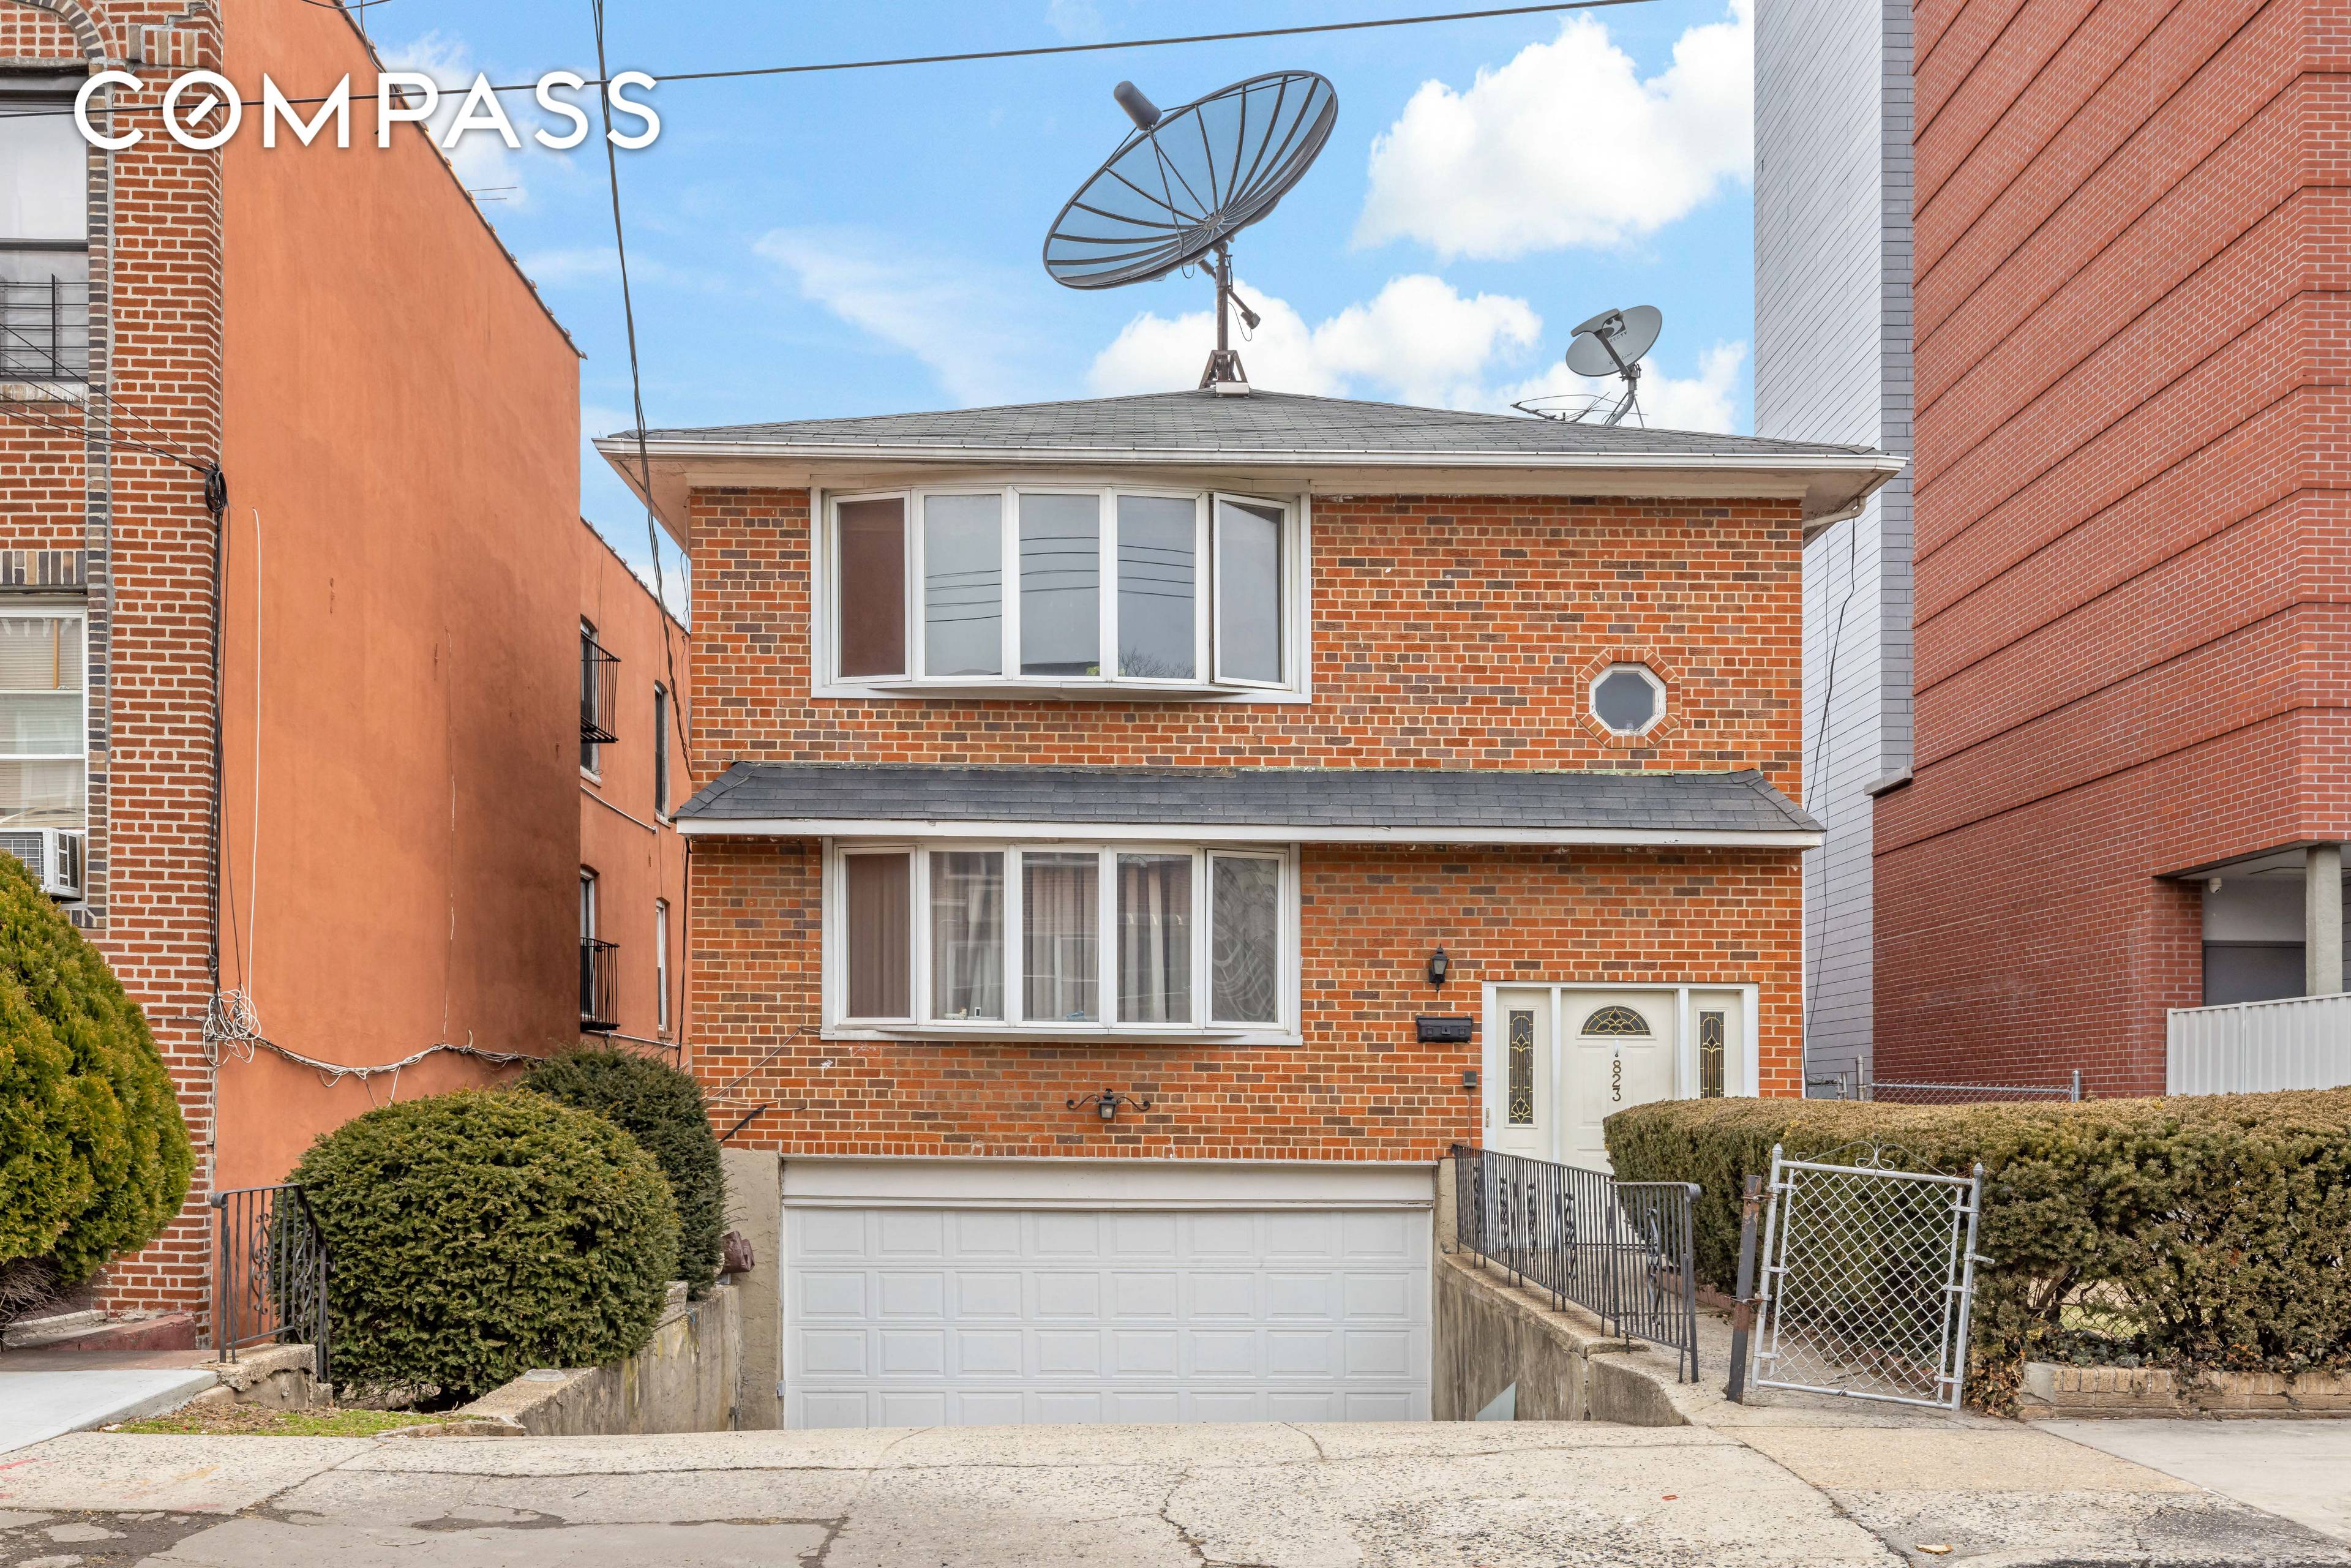 823 Maple Street is a two unit detached house with a private driveway and garage.